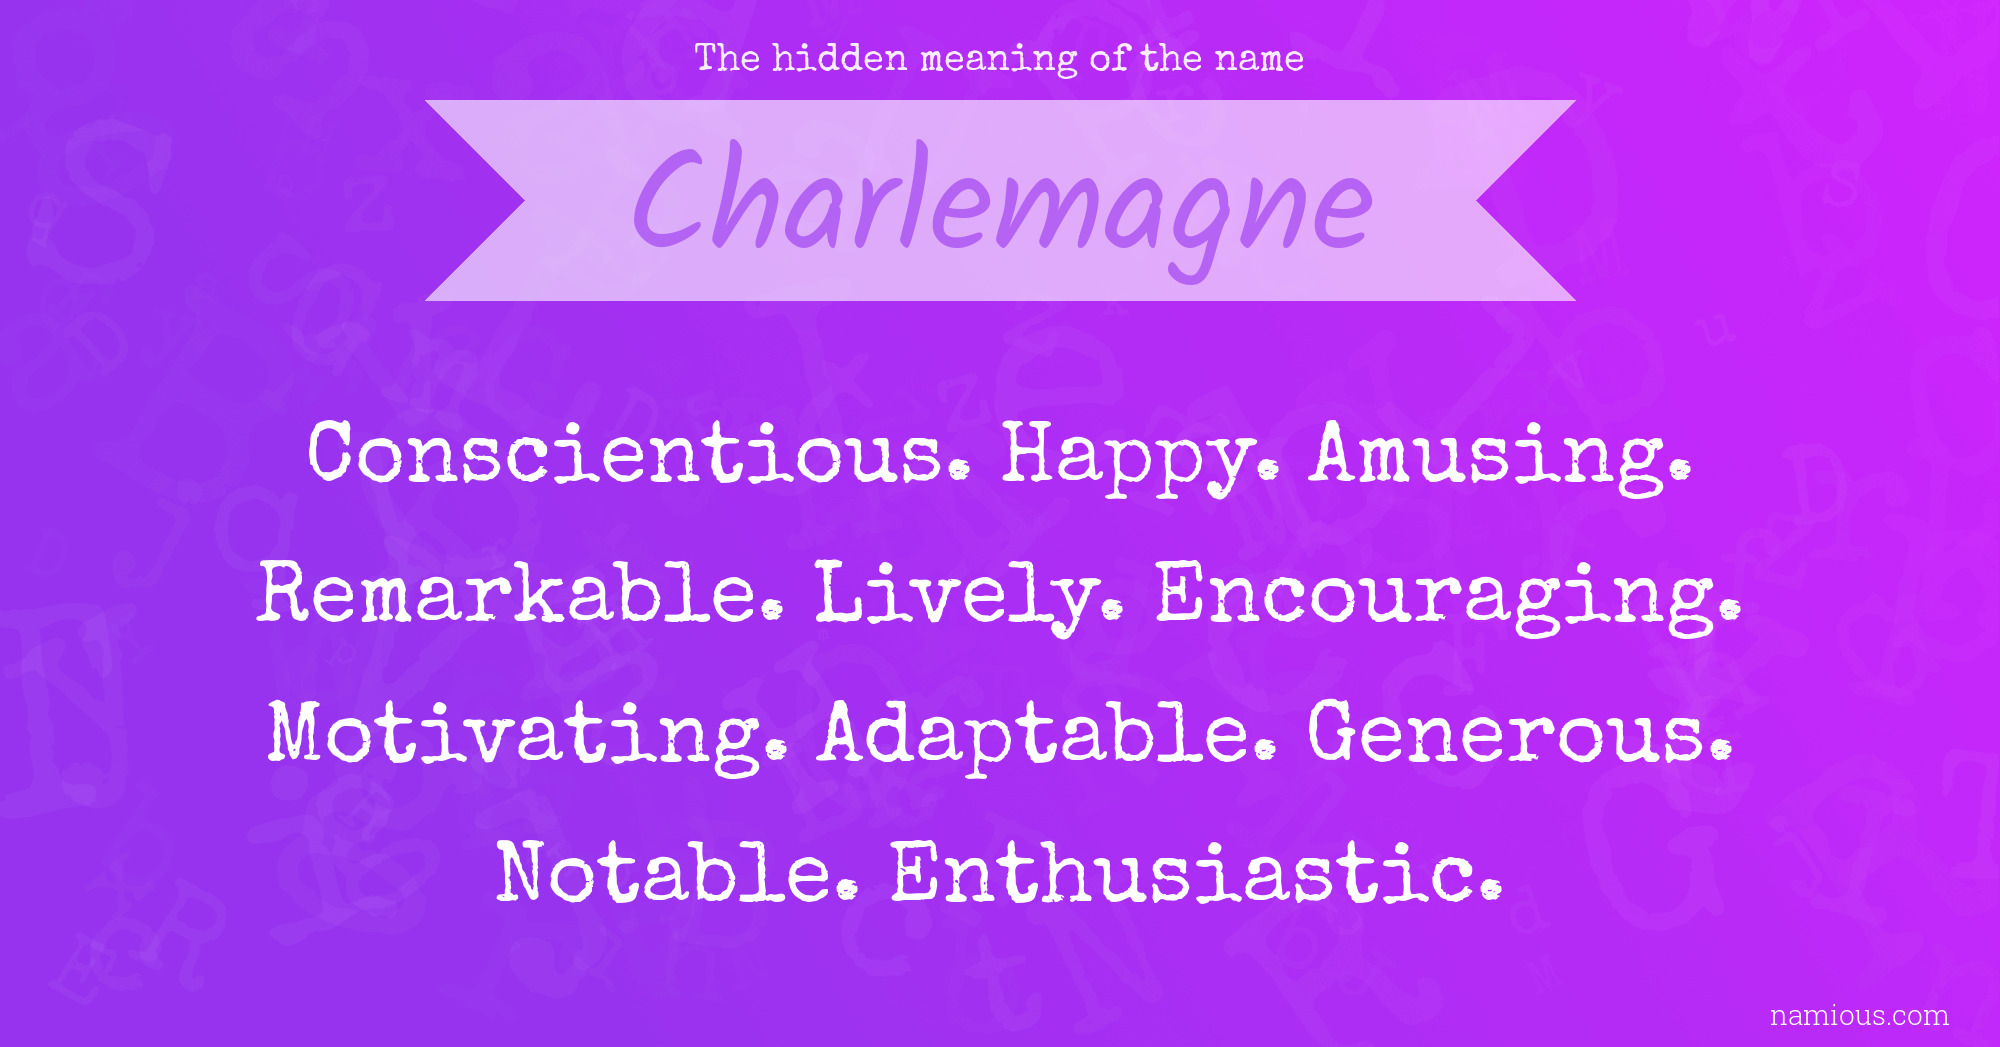 The hidden meaning of the name Charlemagne